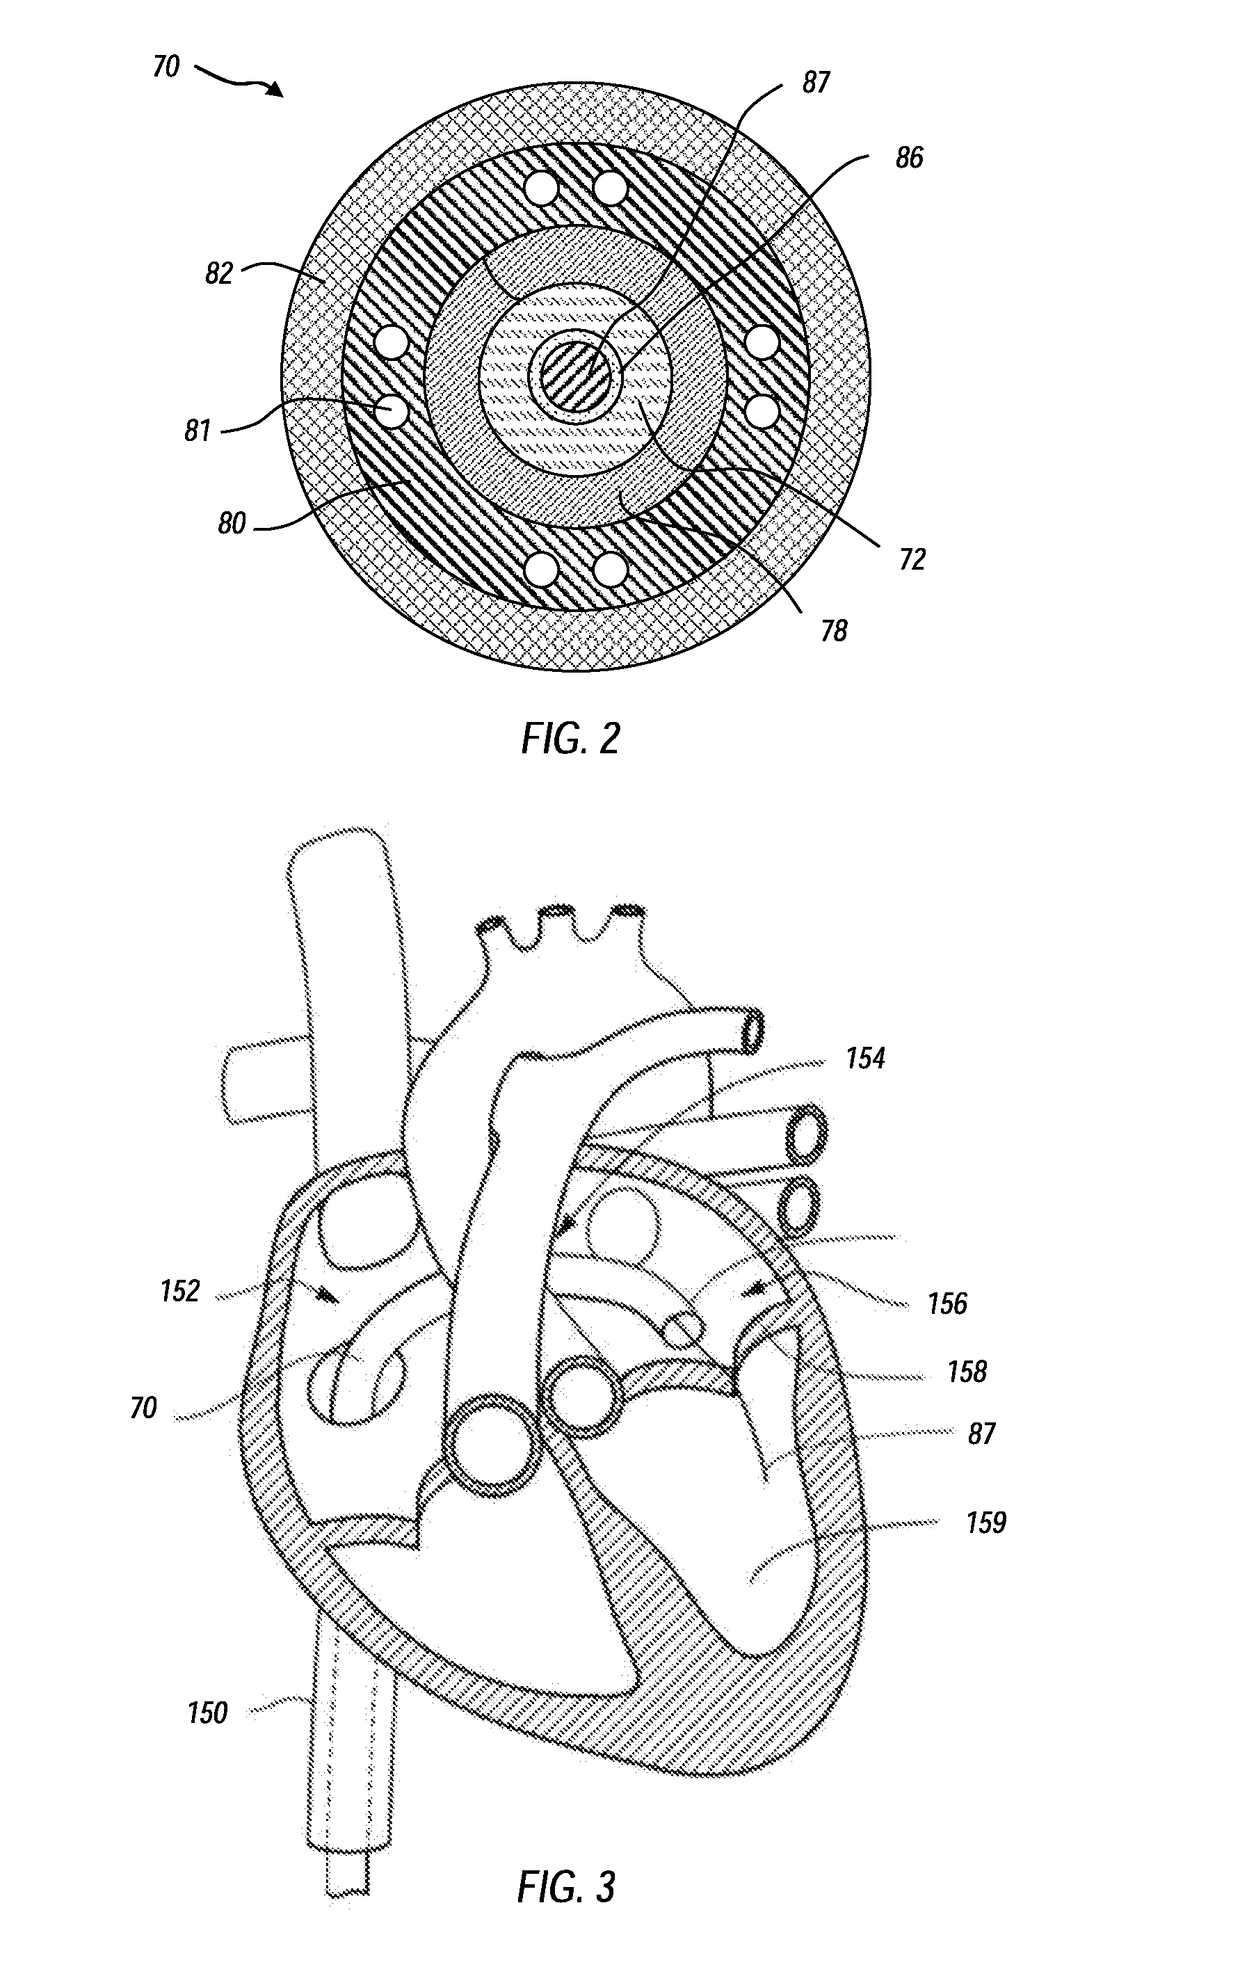 Systems and methods for delivering an intravascular device to the mitral annulus